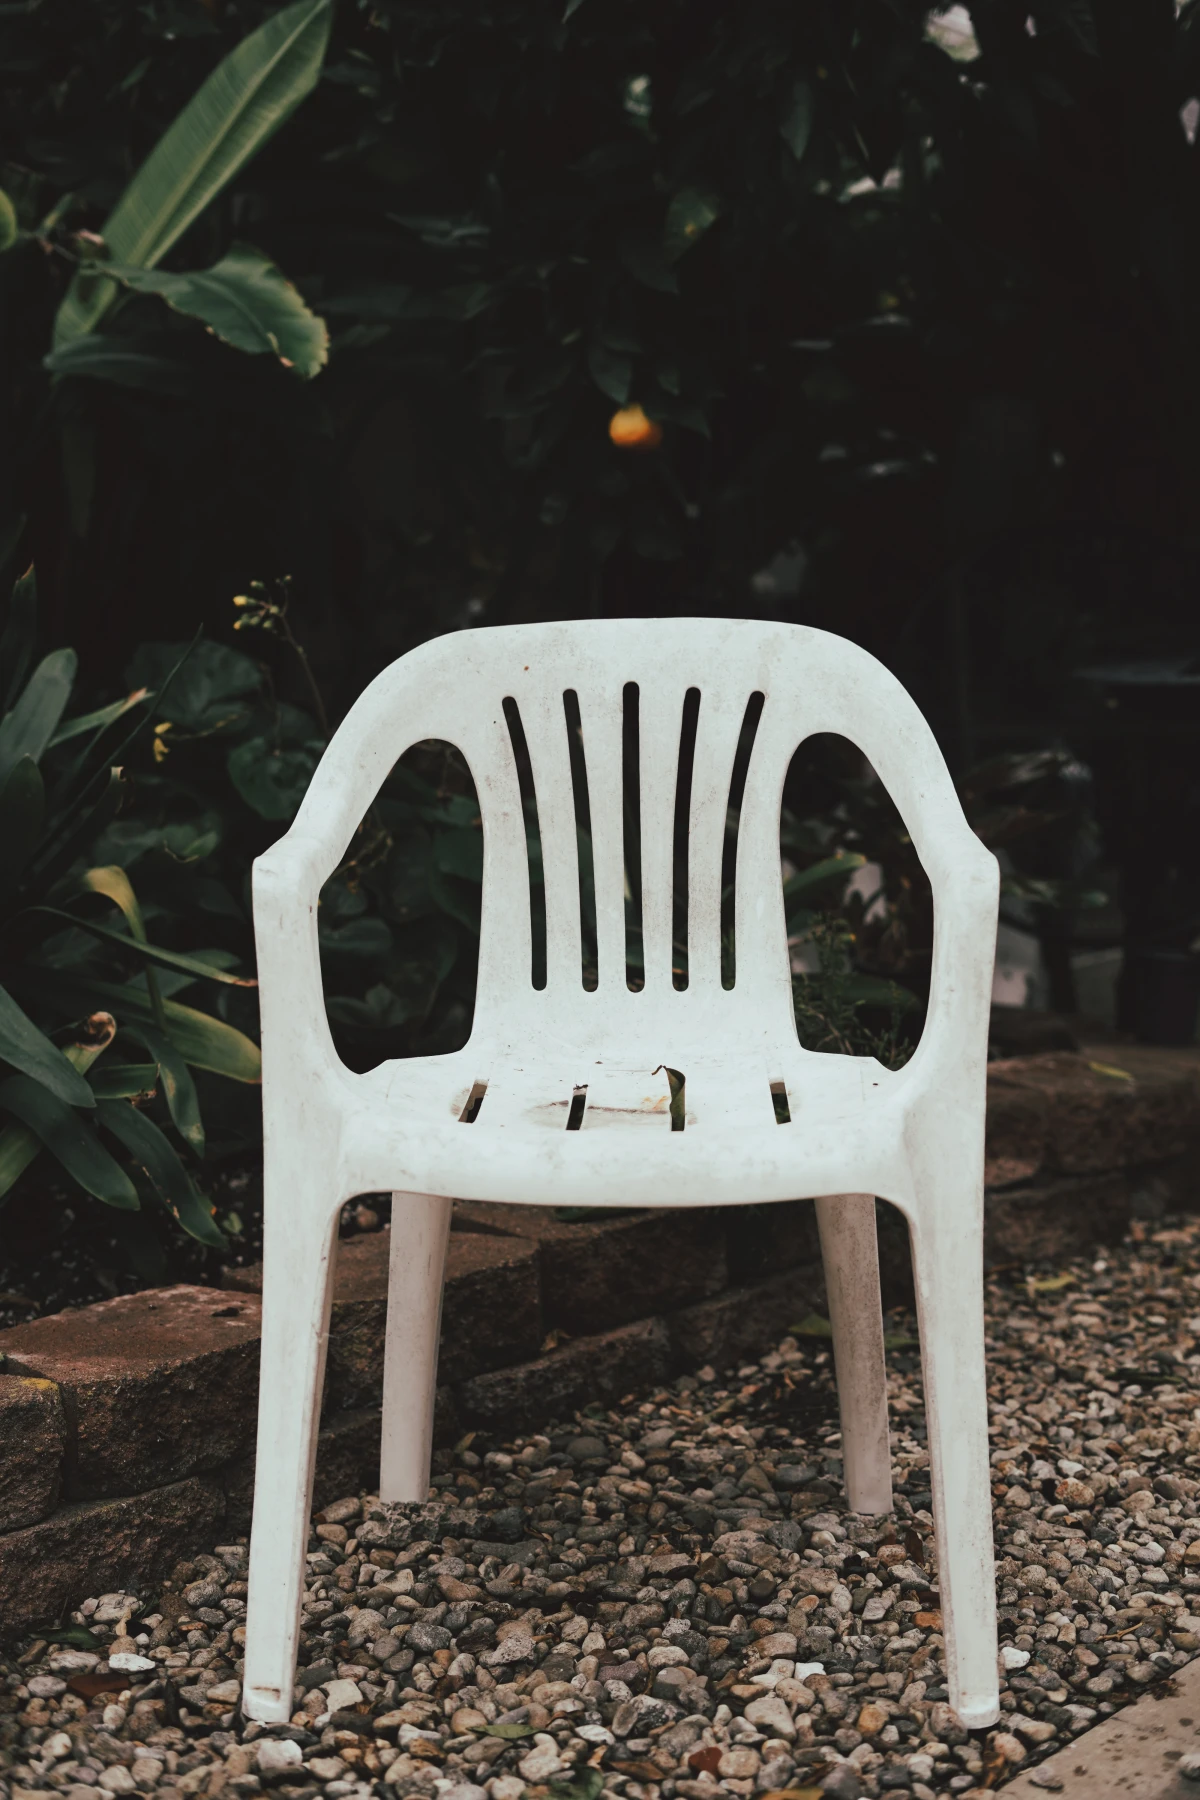 protect garden furniture white plastic chair outside in garden